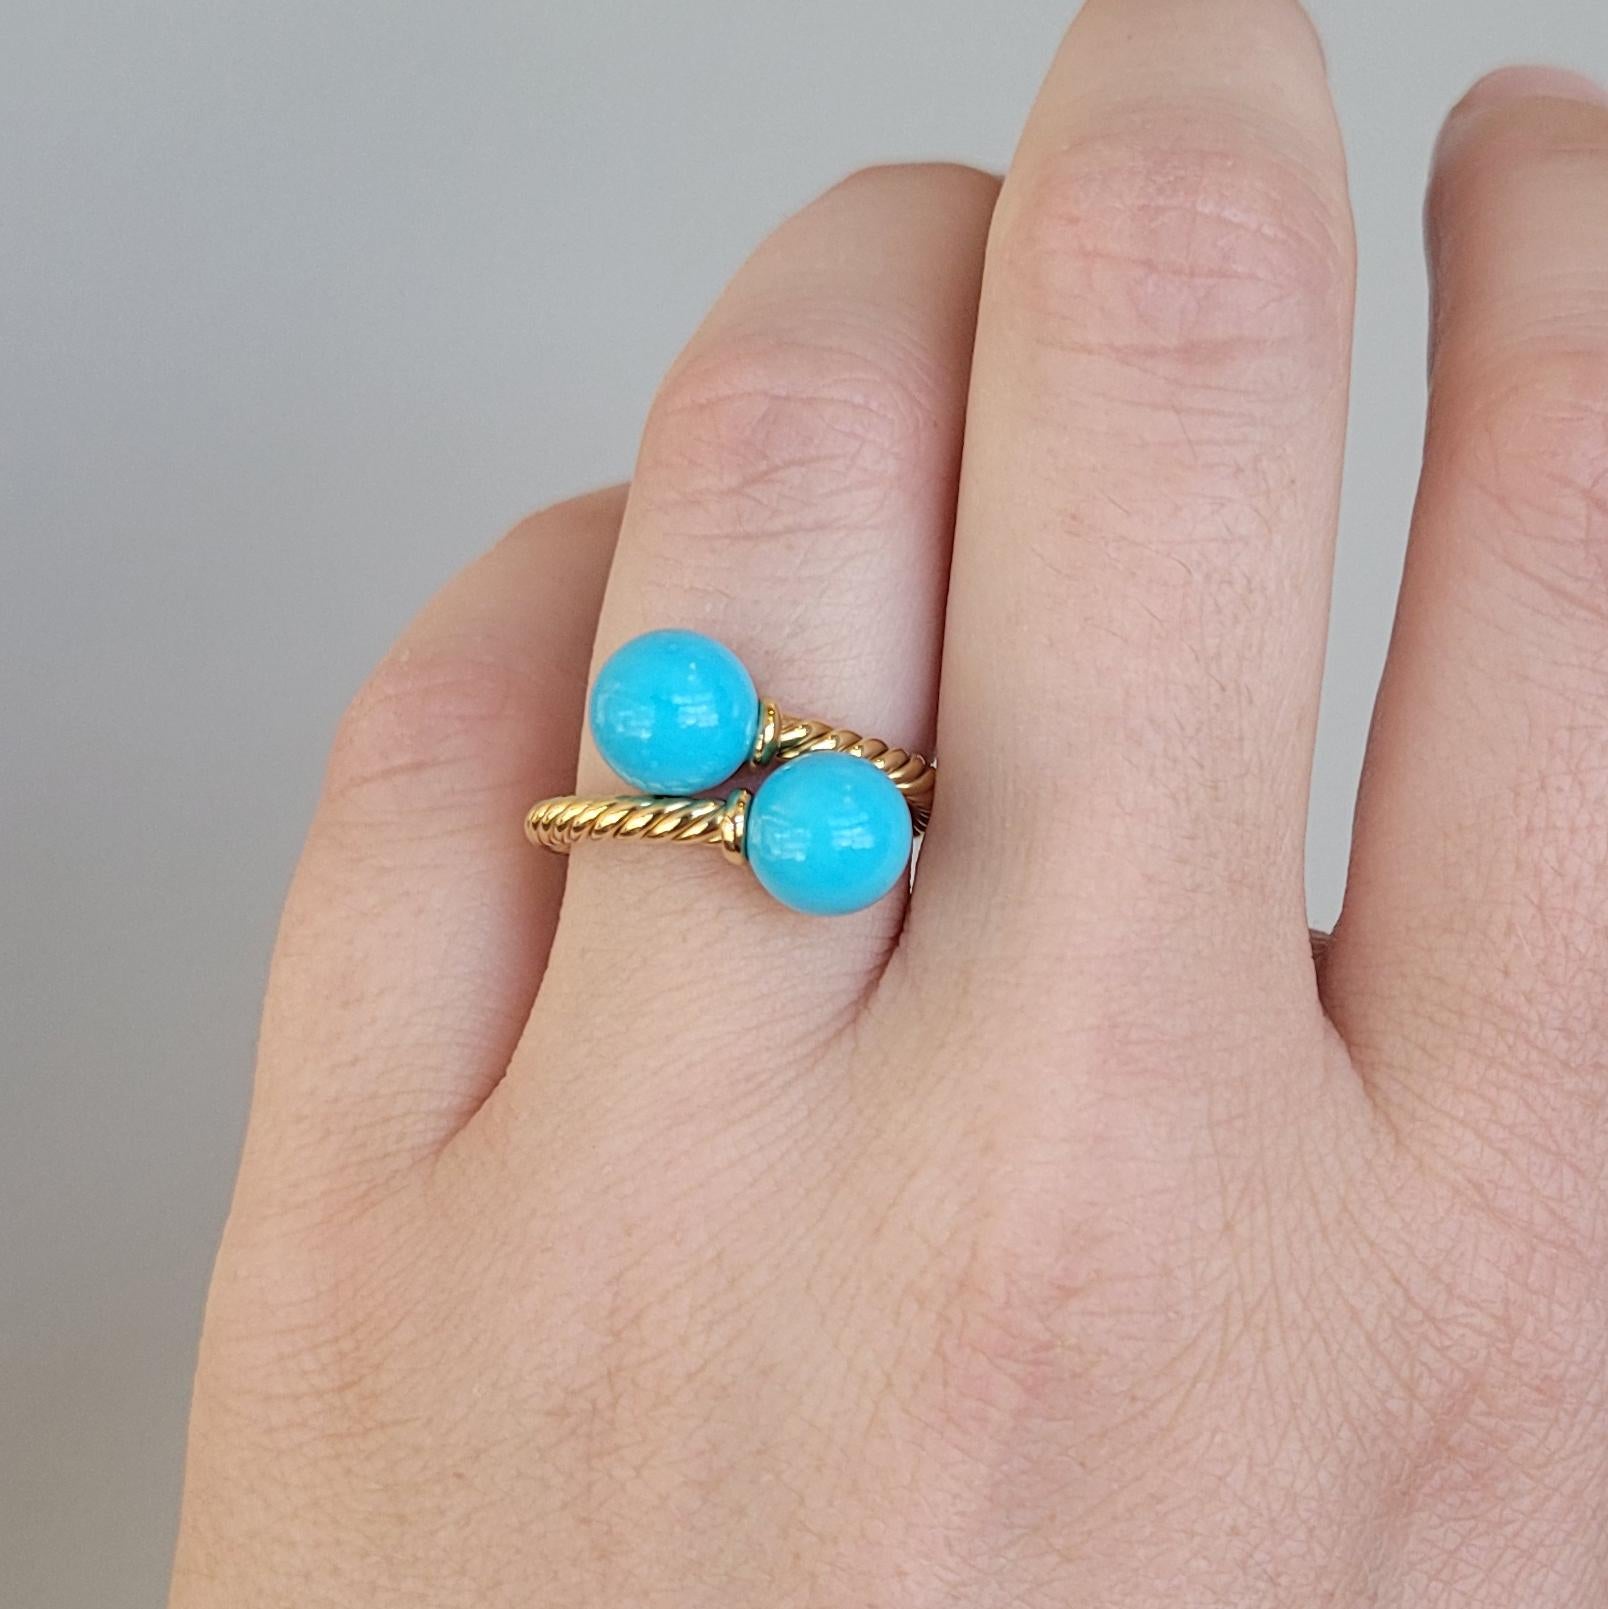 Two turquoise beads accentuate the ends of this bypass style David Yurman Solari ring.
Finger size 7

David Yurman’s artistic signature, Cable began as a bracelet that he hand-twisted from 50 feet of wire. For the past 30 years, he has evolved the